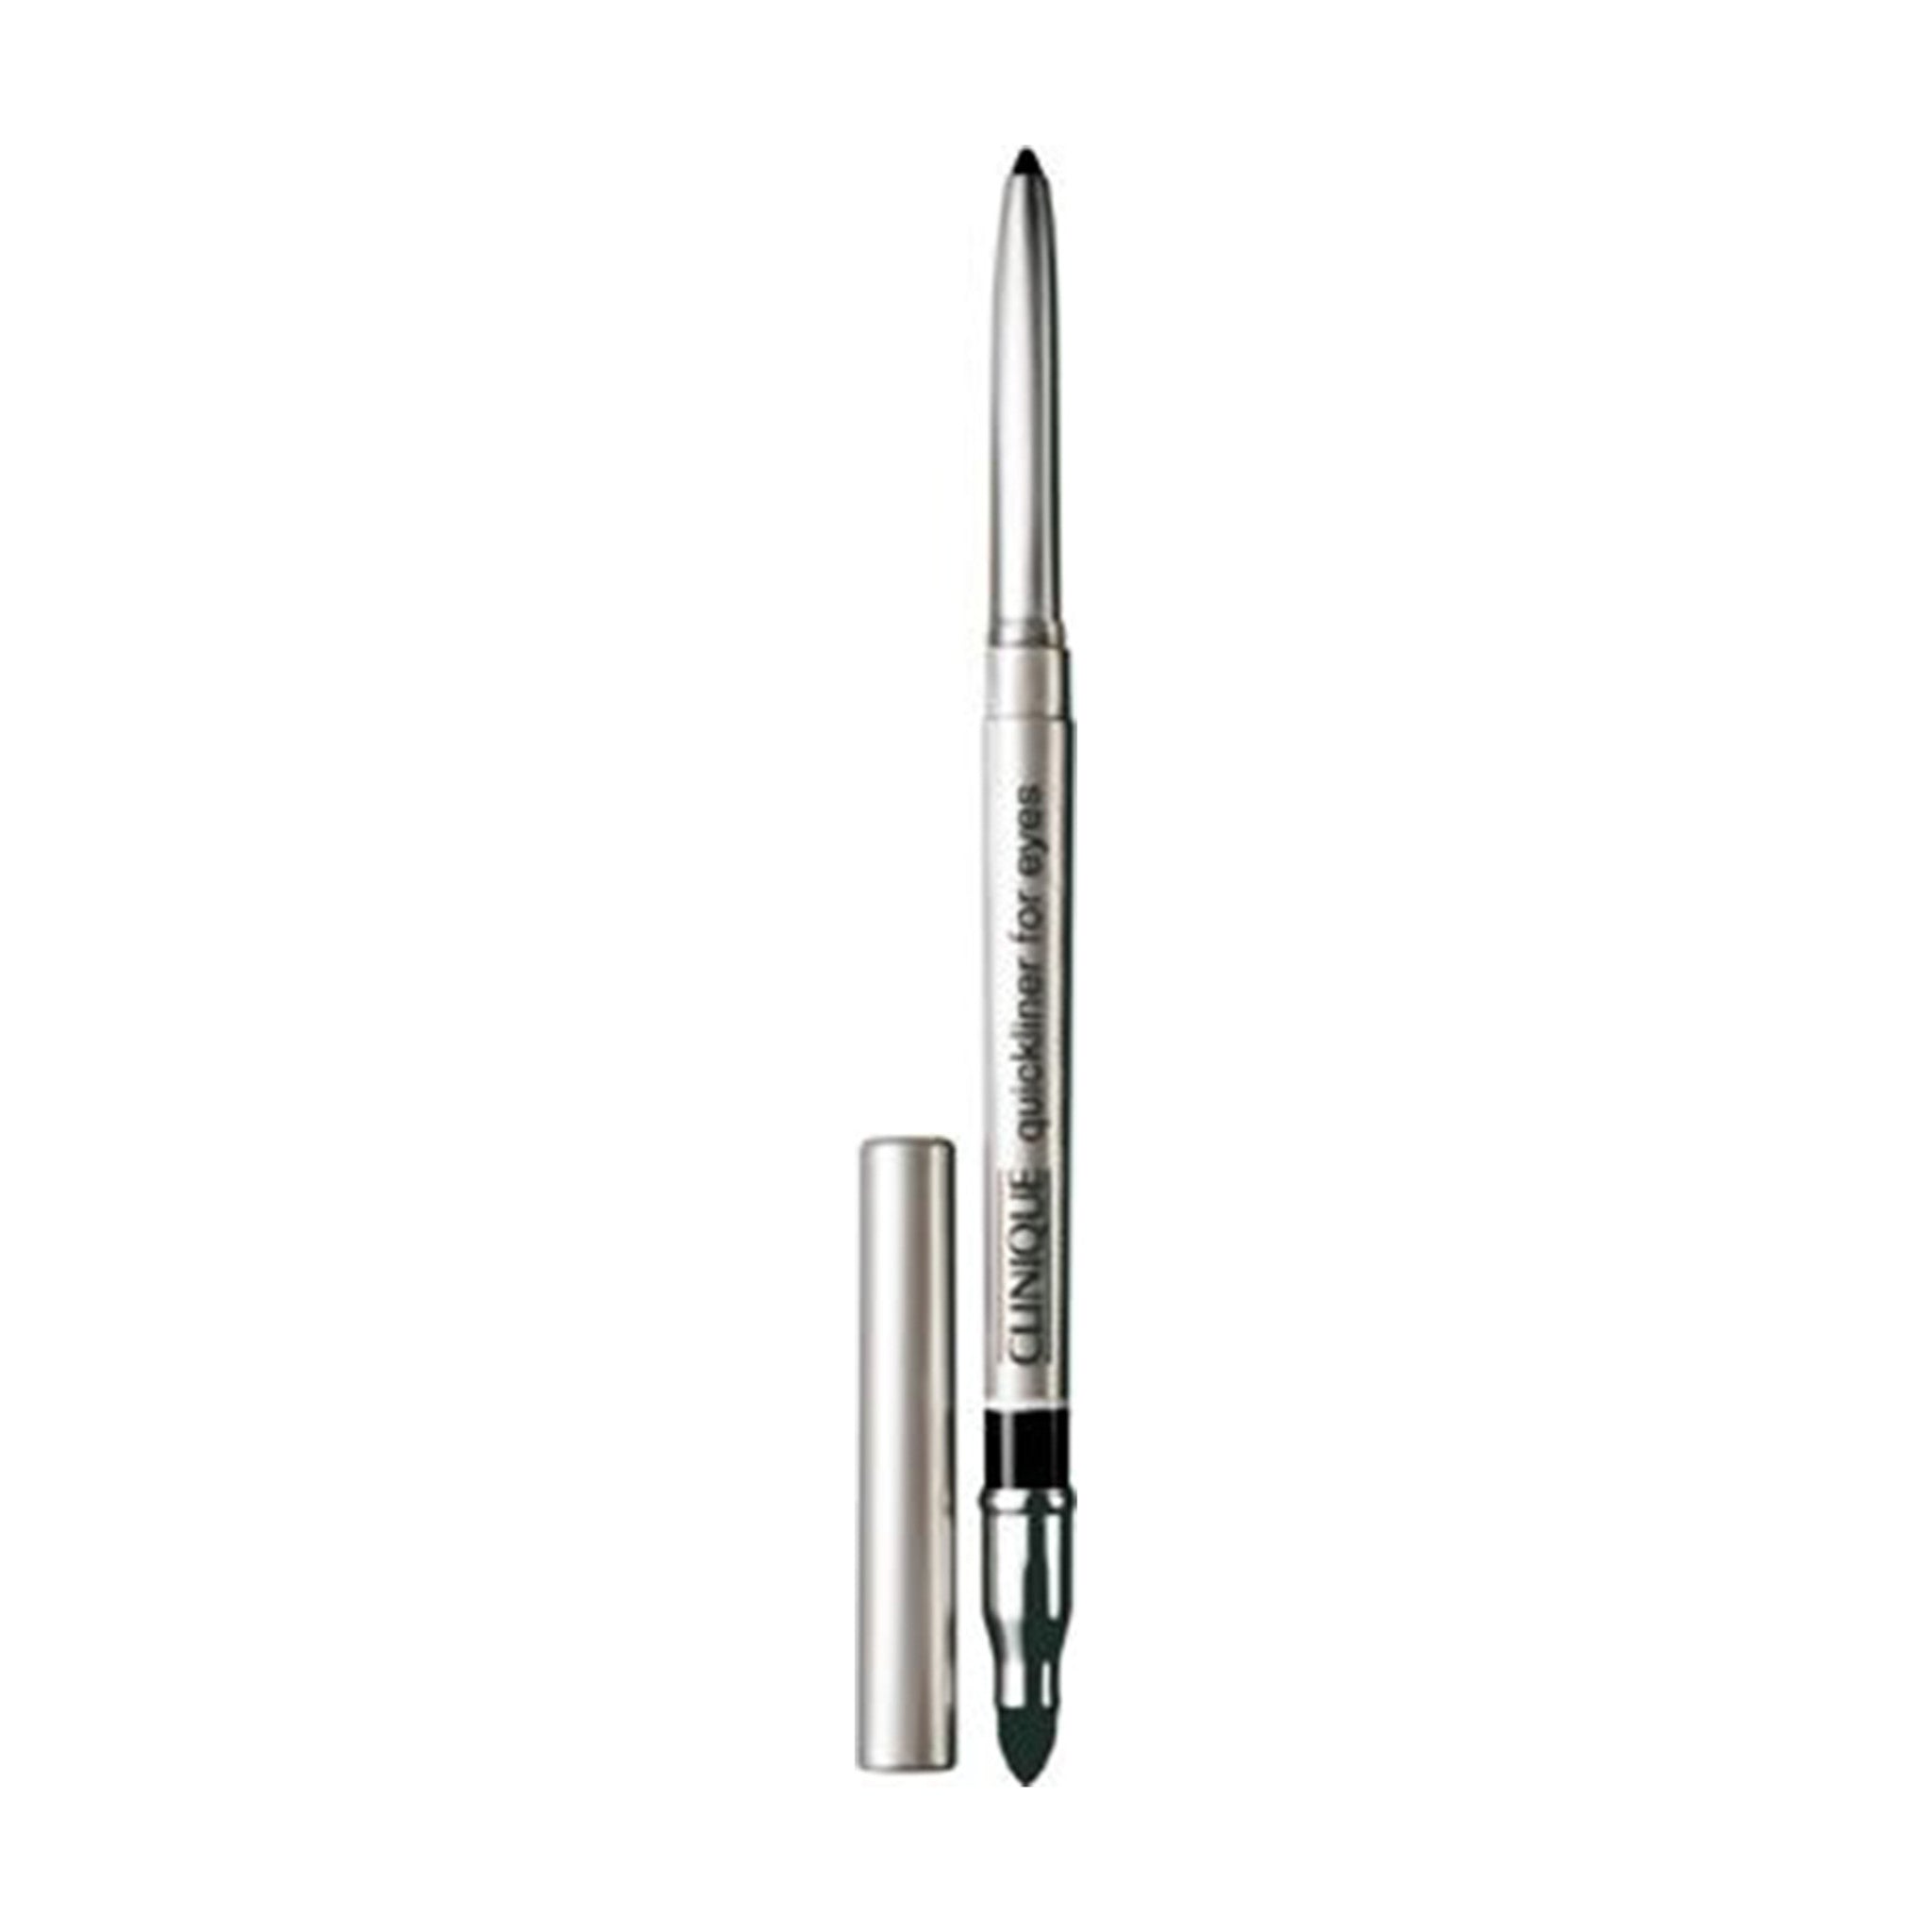 Clinique Quickliner For Eyes Intense Color/Shade variant: Really Black main image. This product is in the color black